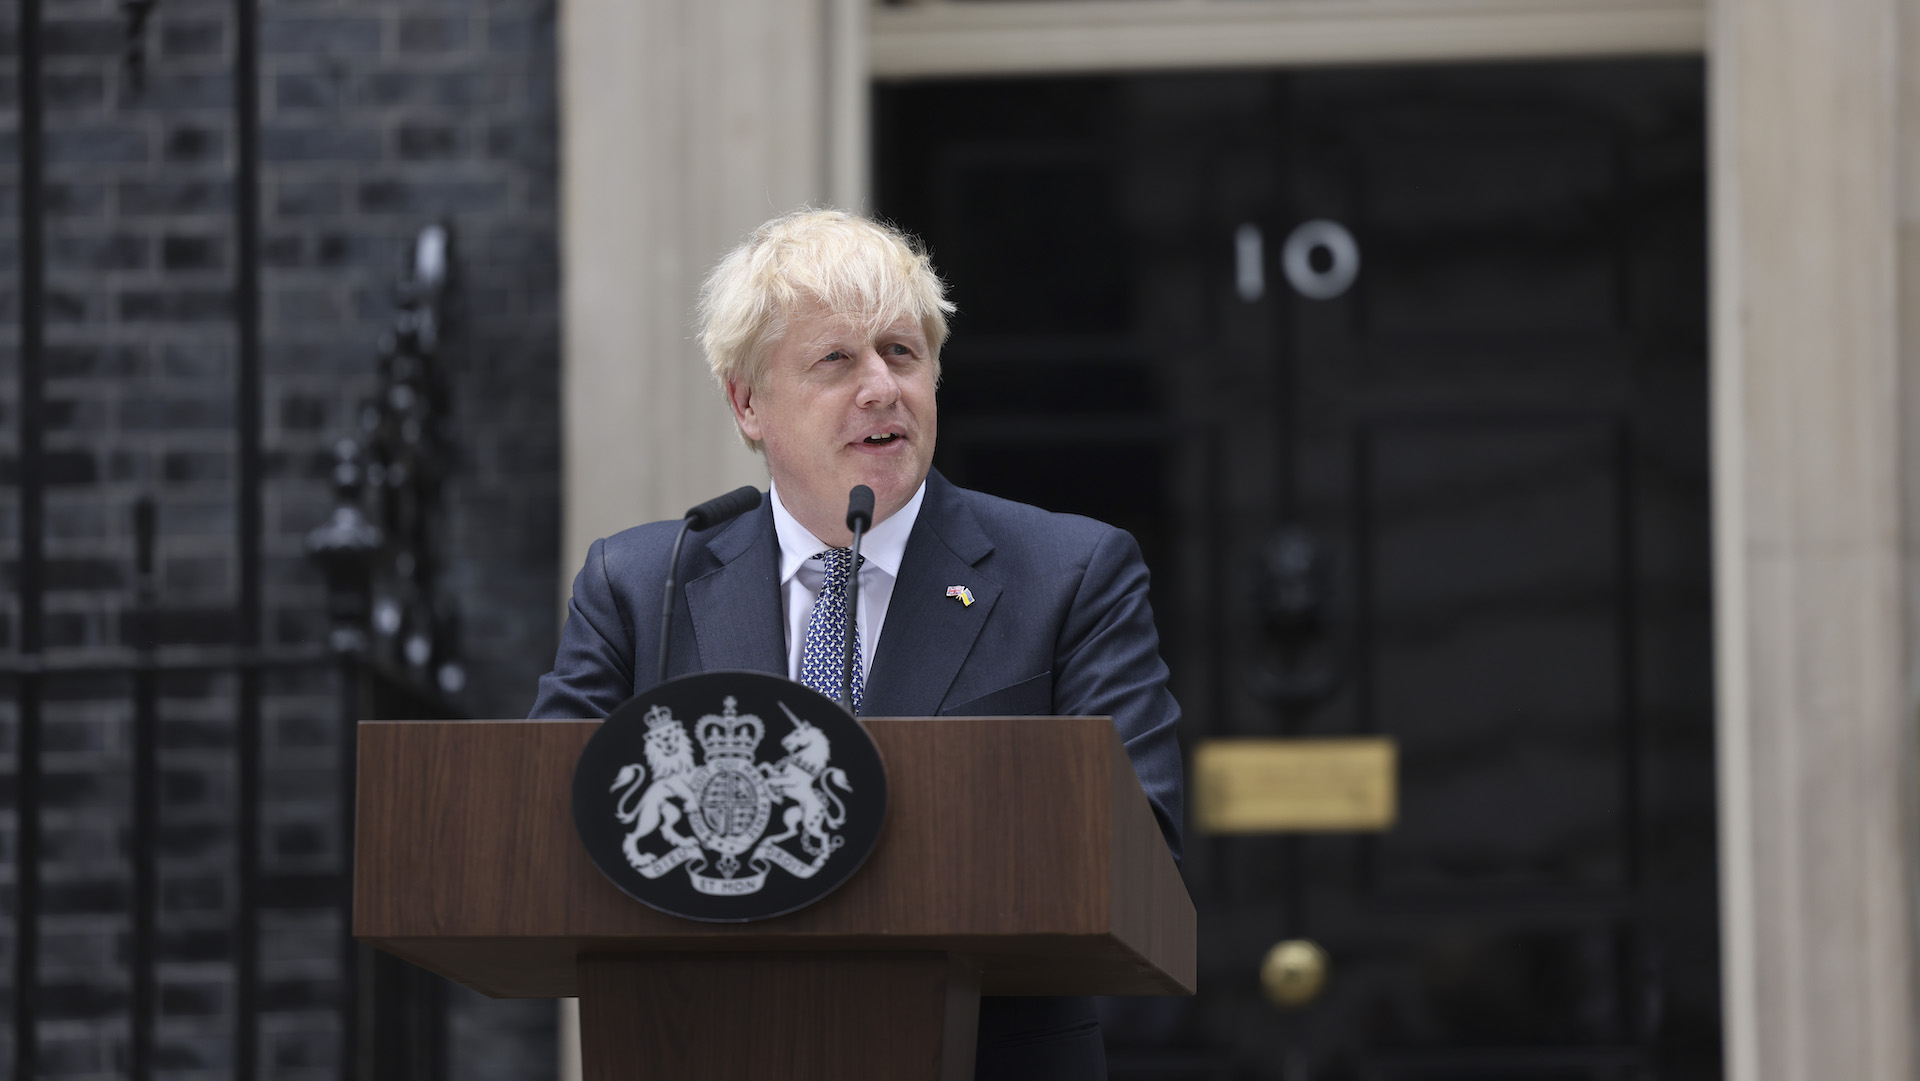 Boris Johnson stands at the podium outside downing street with the famous door in the background